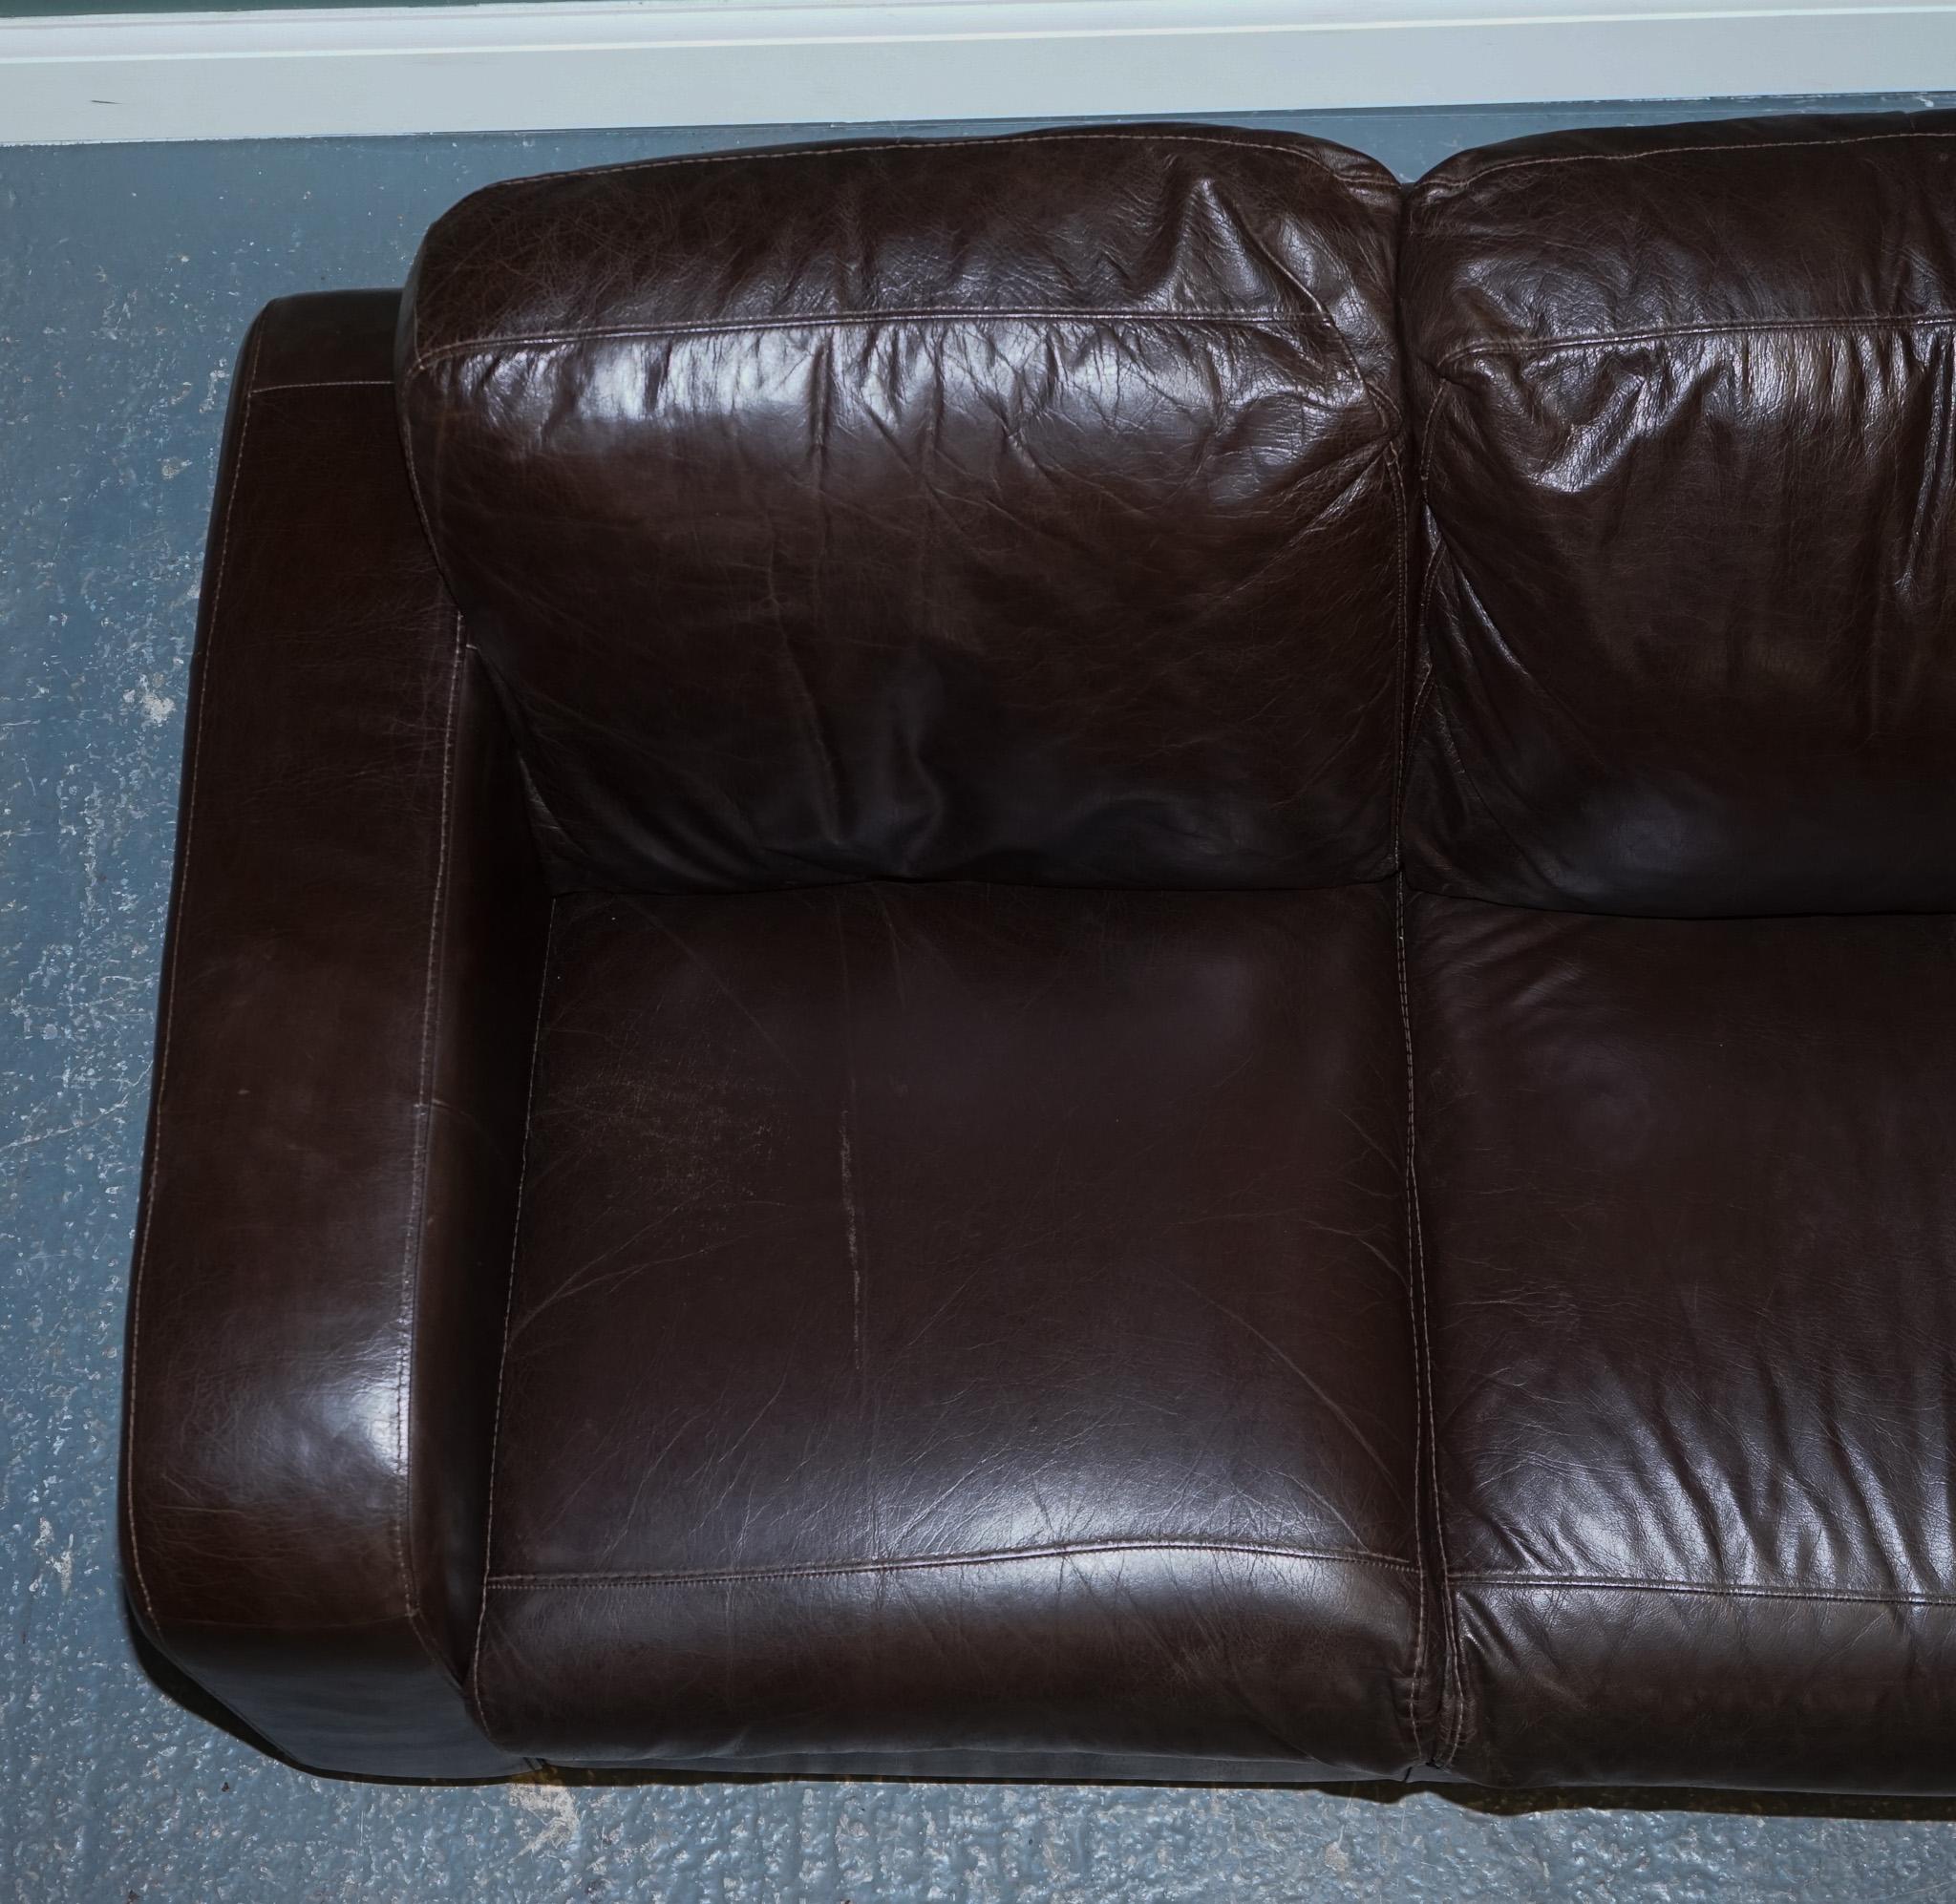 STUNNING VINTAGE CHOCOLATE BROWN LEATHER THREE SEATER SOFA BY SOFITALiA In Good Condition For Sale In Pulborough, GB